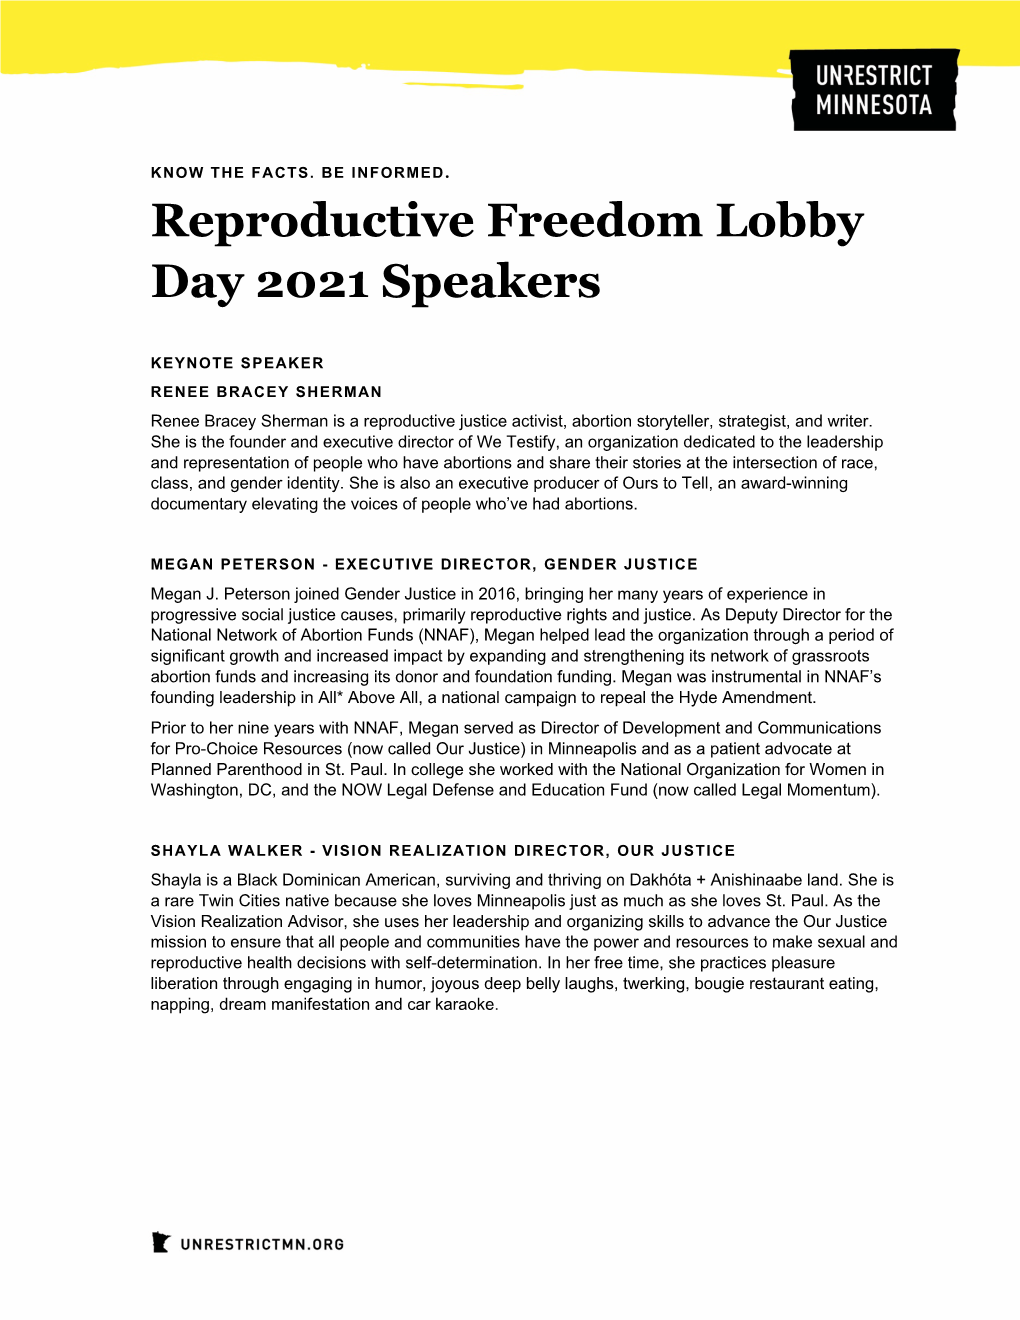 Reproductive Freedom Lobby Day Speakers